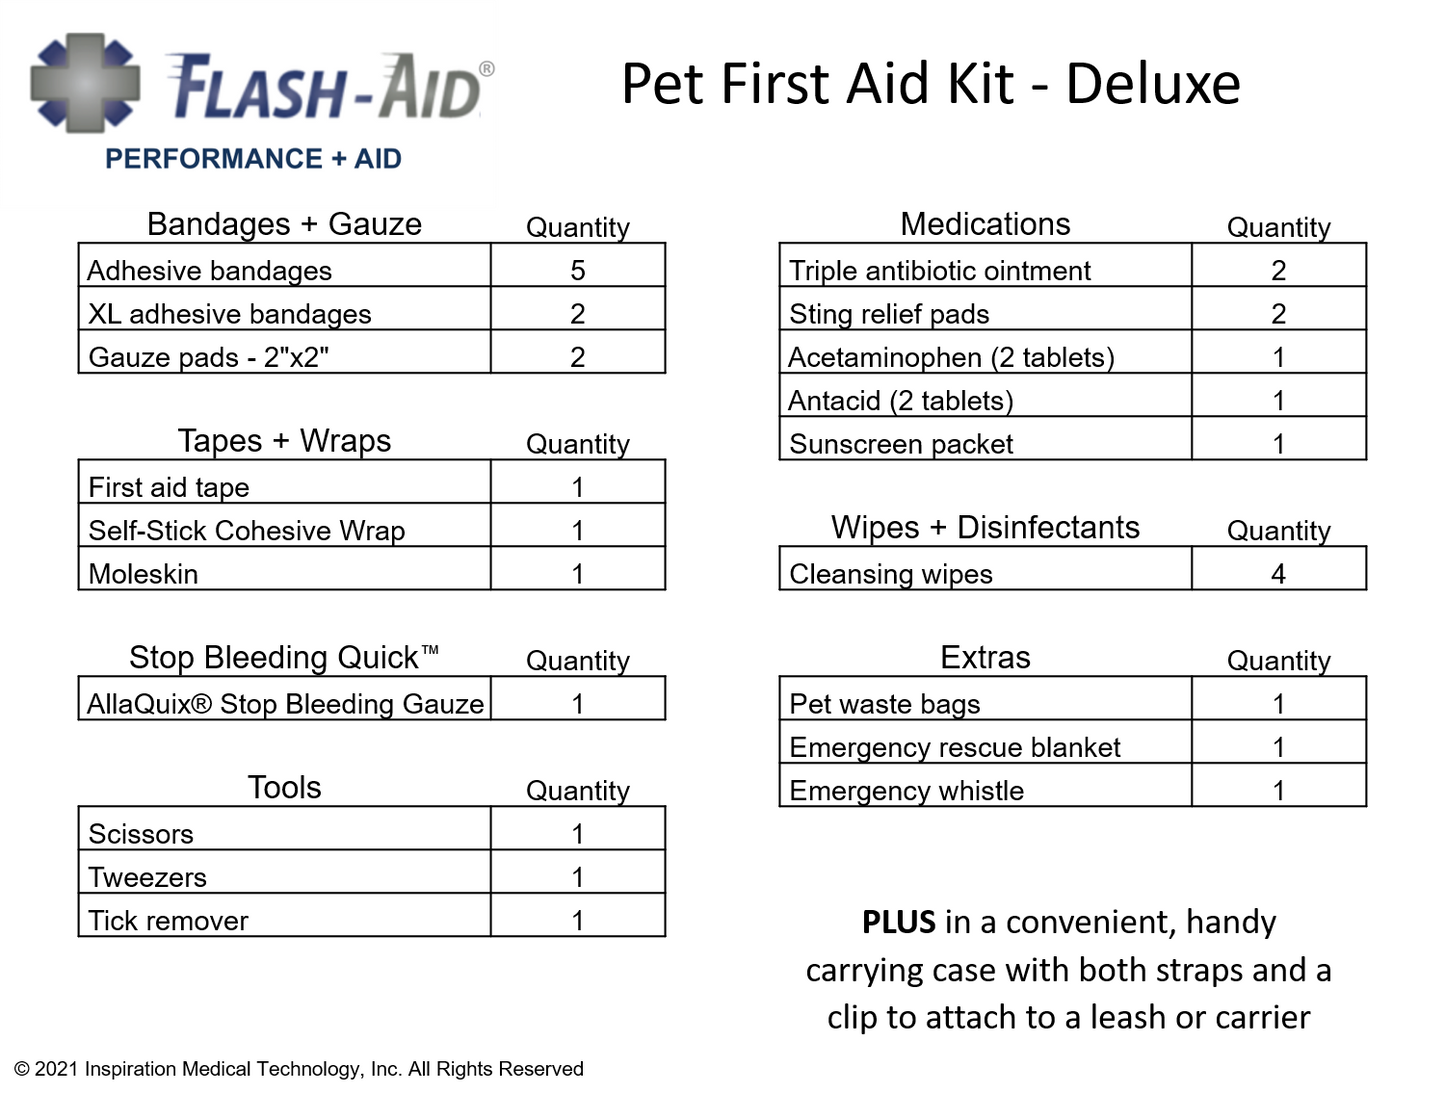 Pet First-Aid Kit (Deluxe)